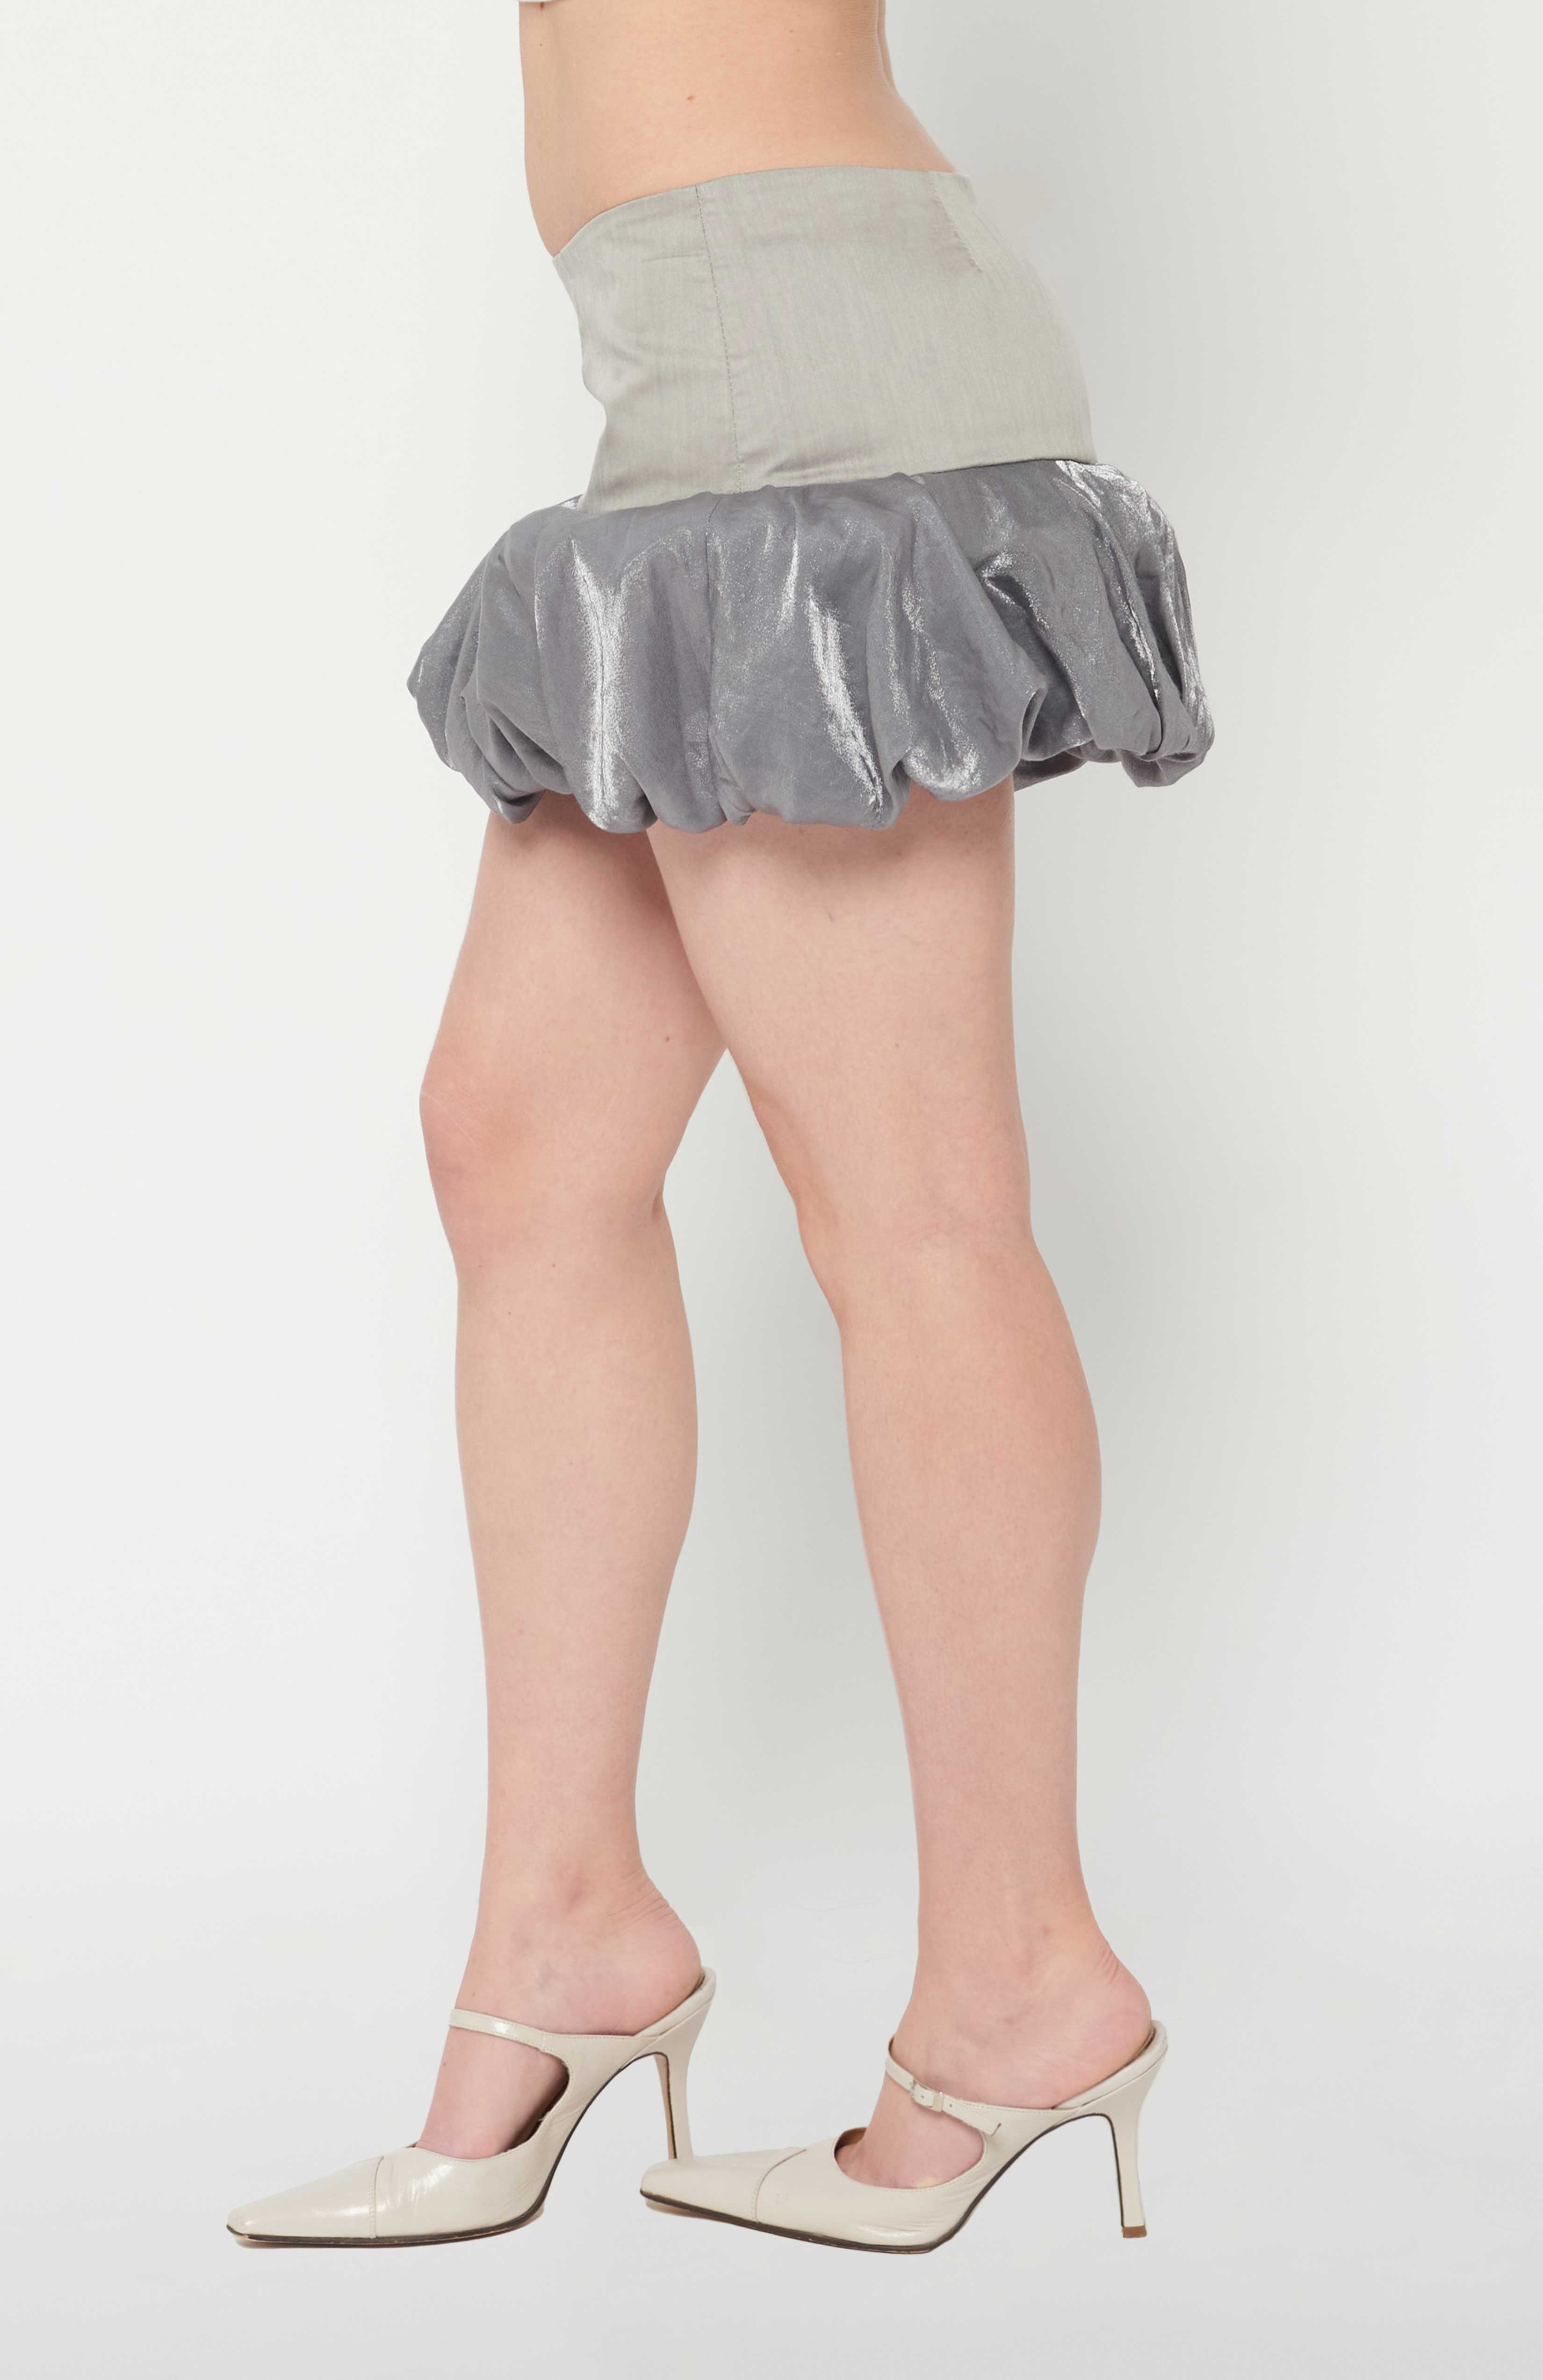 Maroske Peech A flirty playful bubble mid waisted mini skirt that salutes the fashion trends of the 1980s. This mid rise puffball style is created with a crinoline inner foundation to hold its balloon-like shape. A wonderful way to add volume to a silhouette.